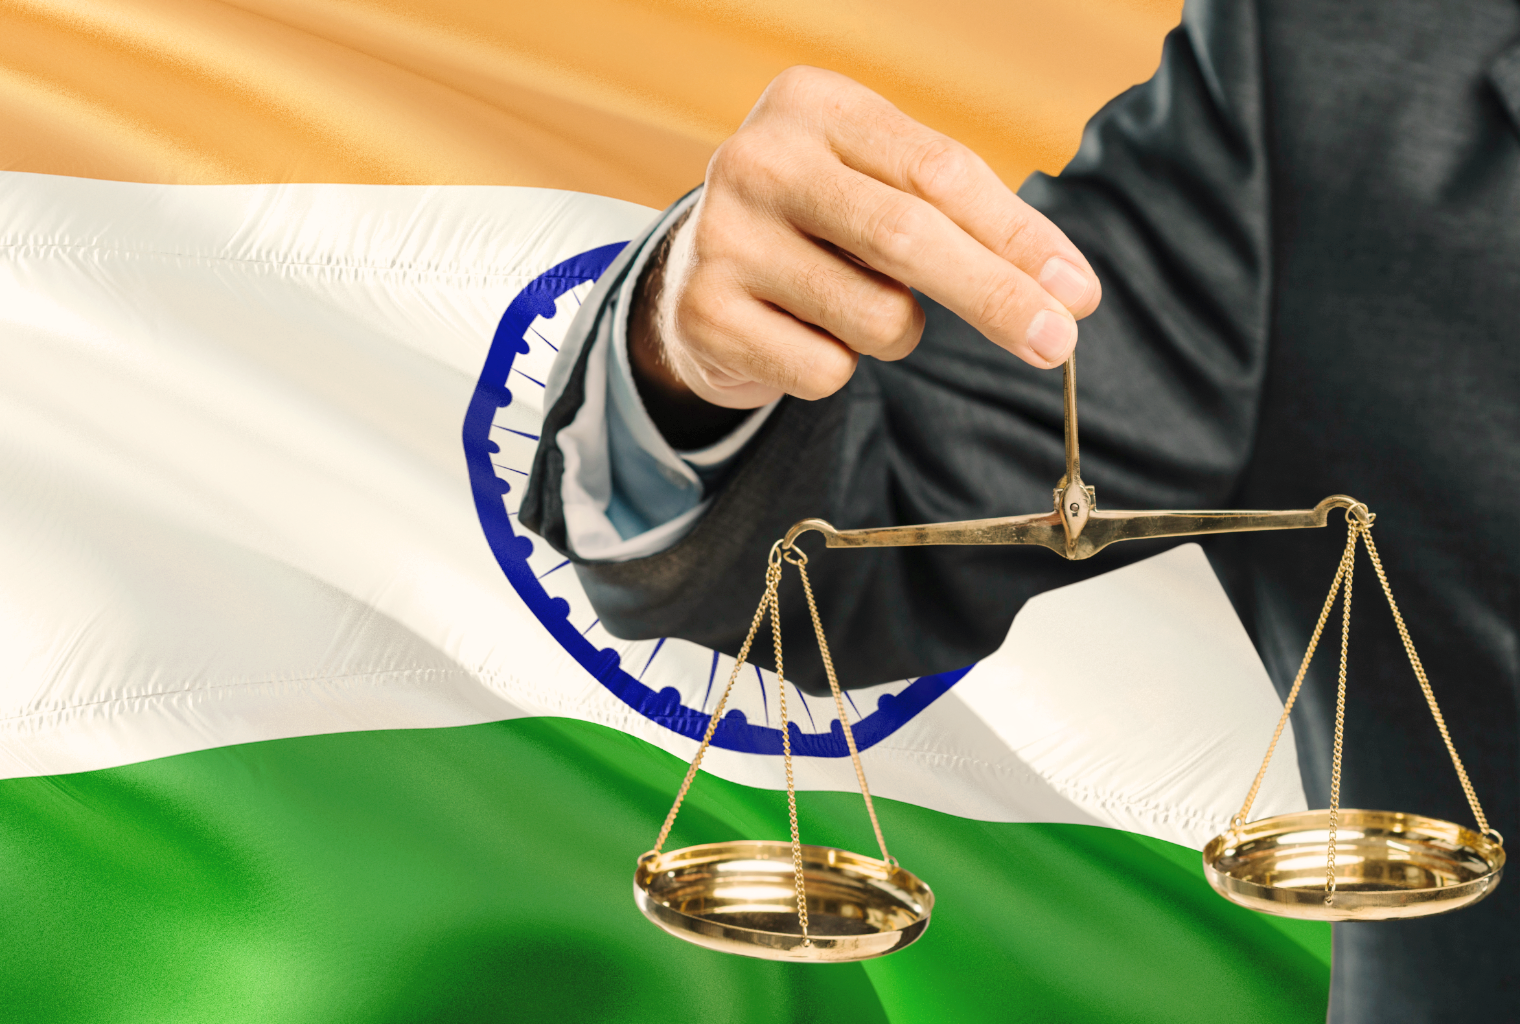 Indian Government Confirms Cryptocurrency Regulation in Final Stages